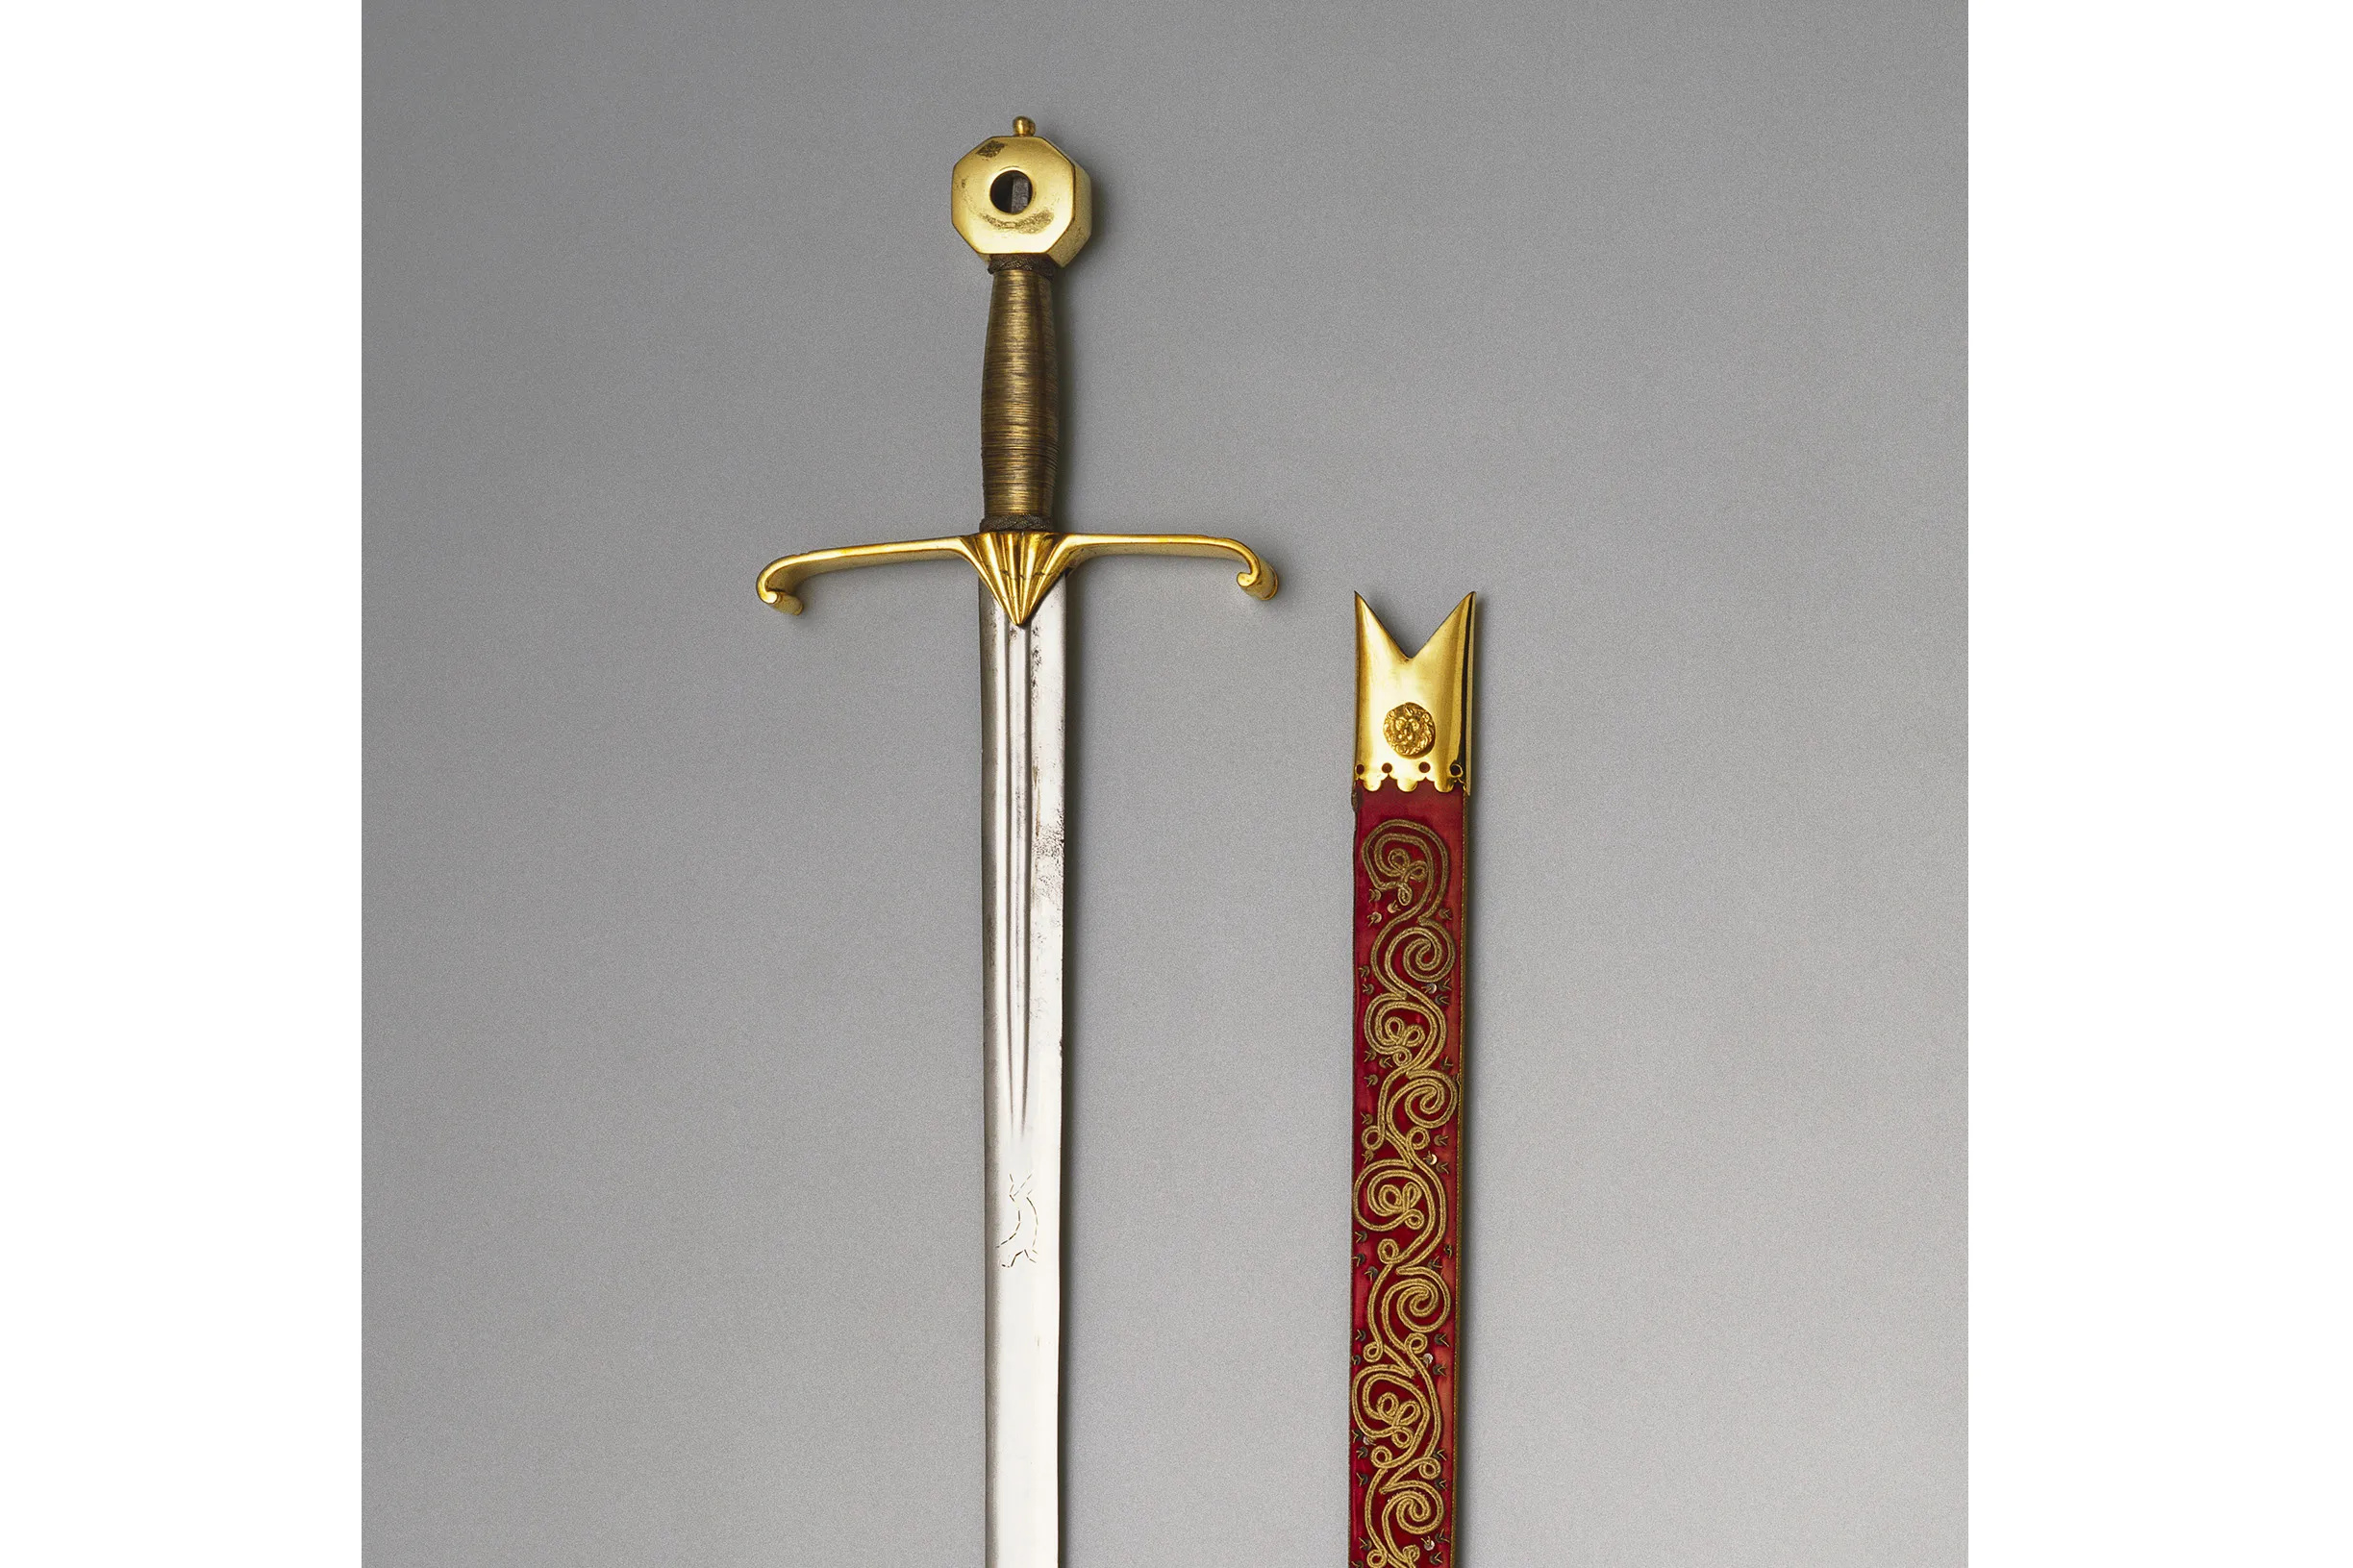 The Sword of Spiritual Justice. Royal Collection Trust / © His Majesty King Charles III 2023